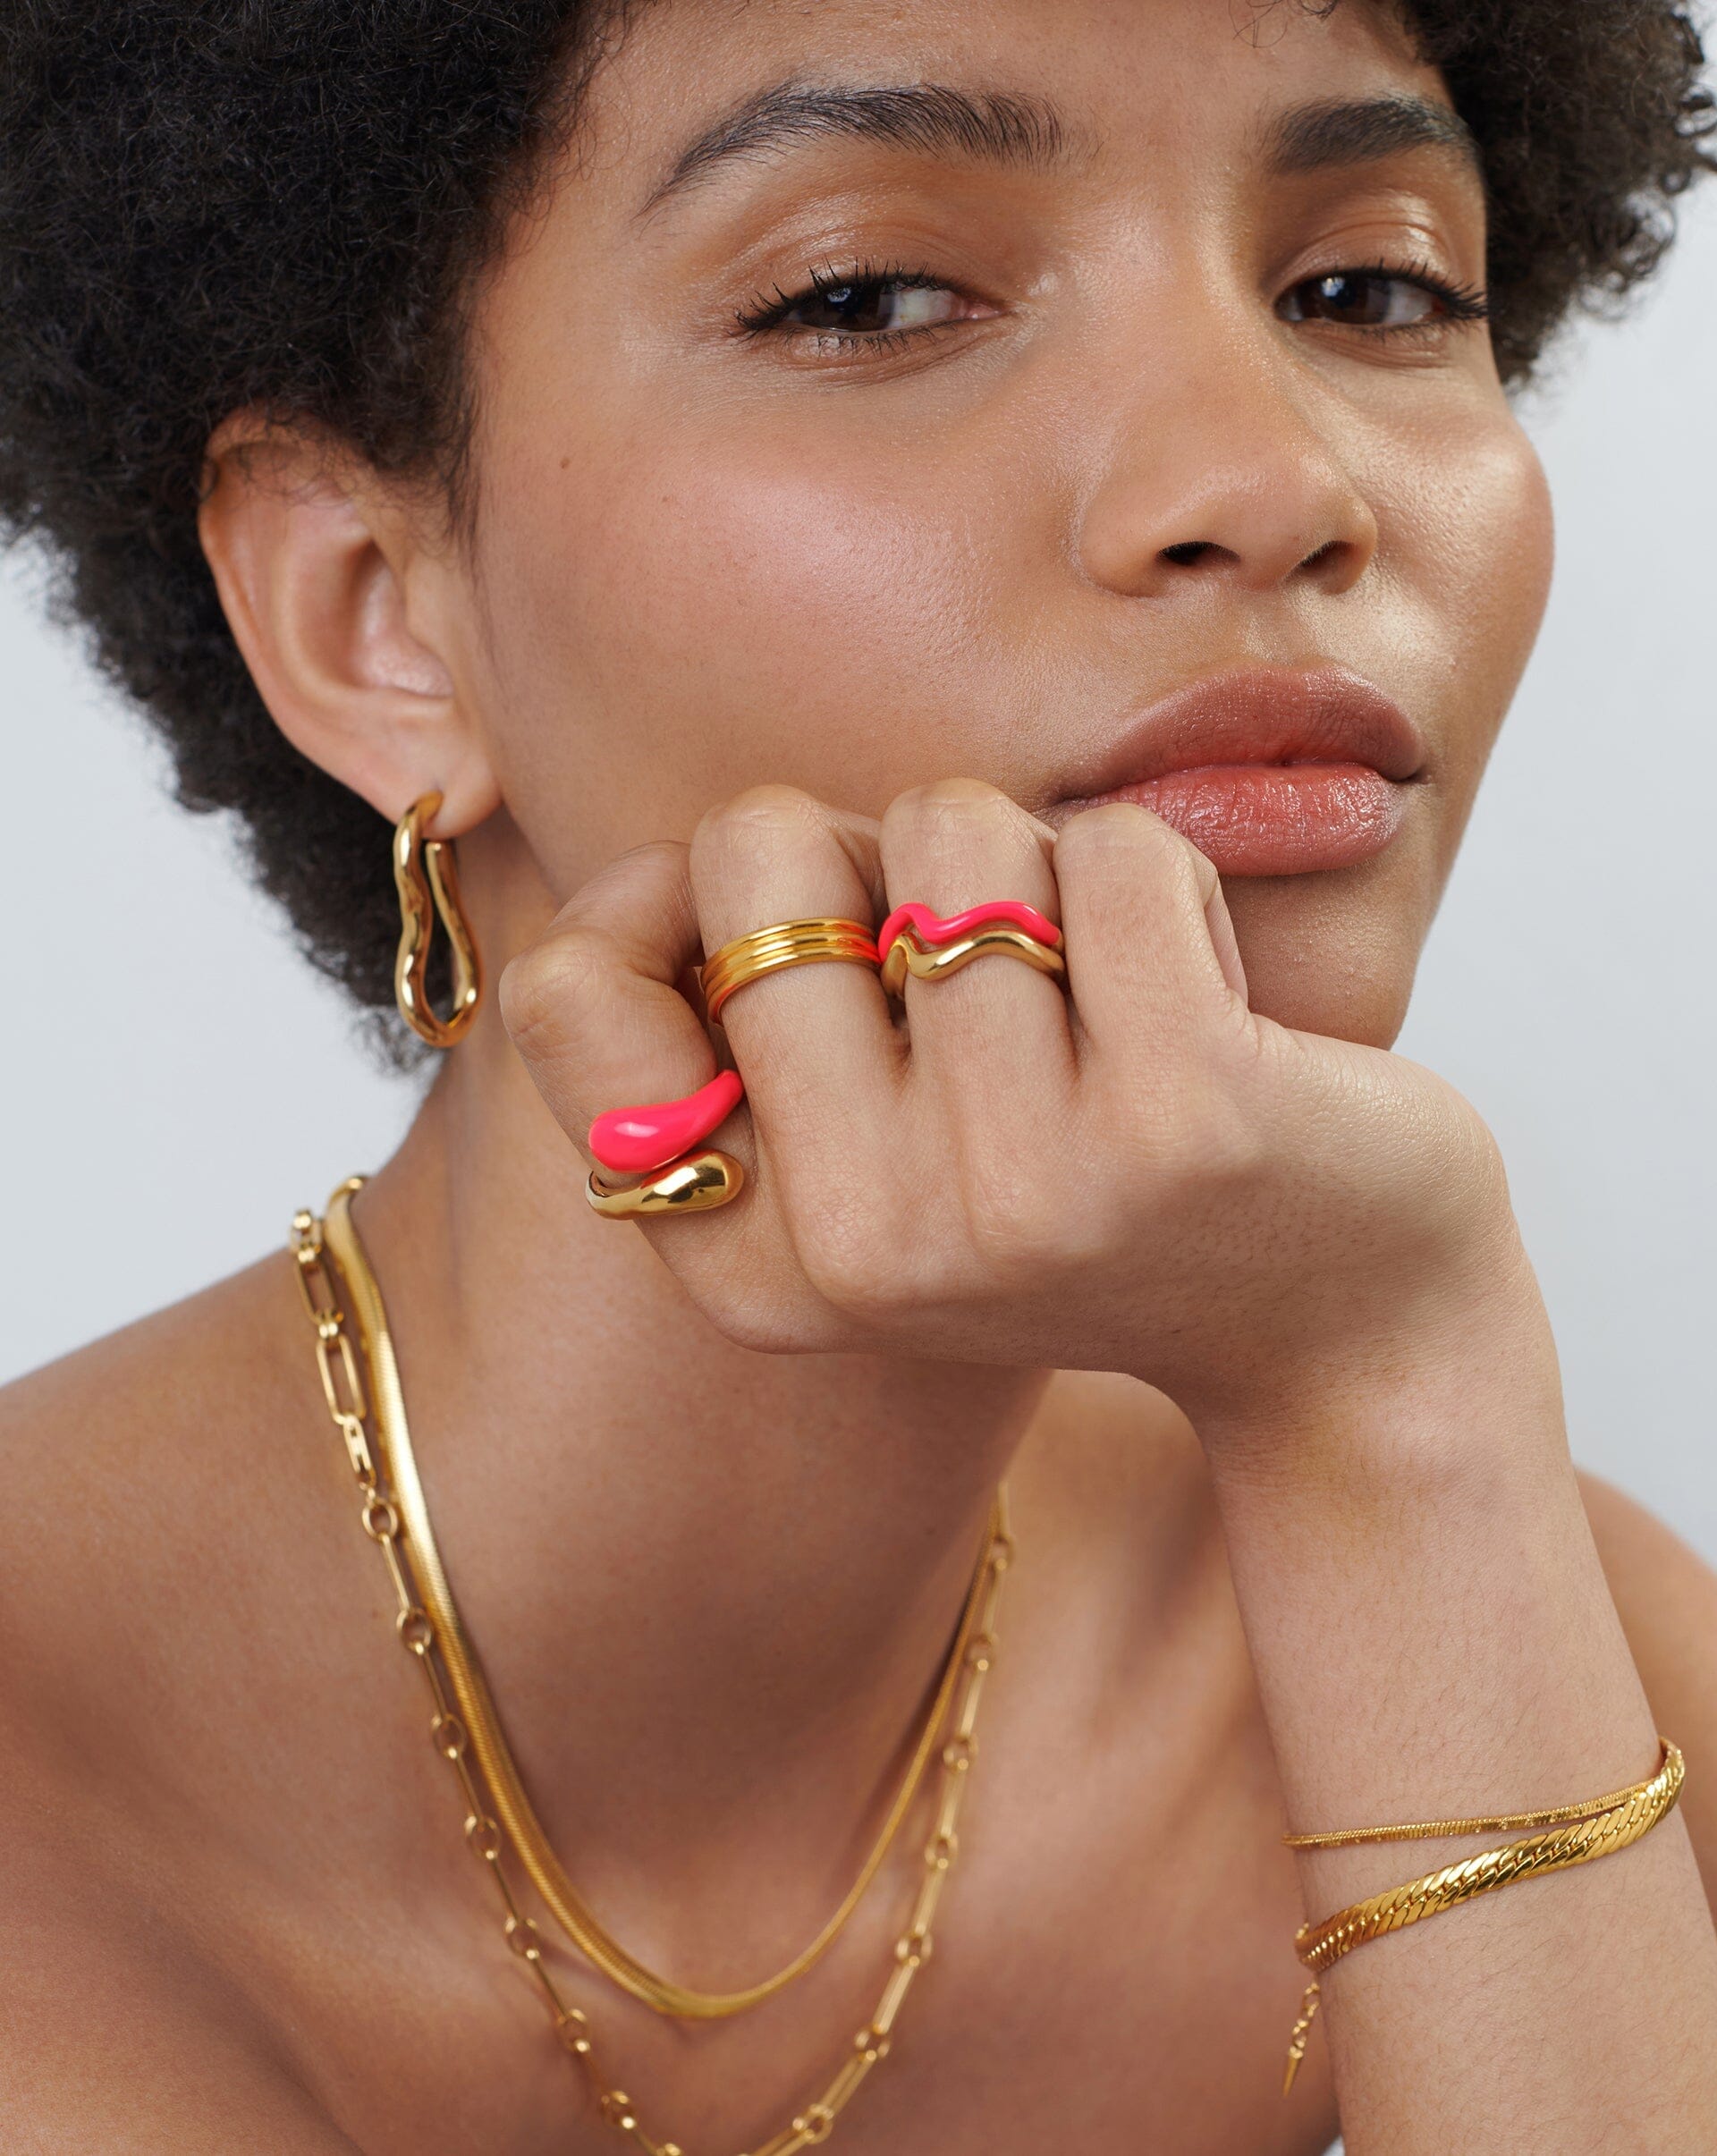 Squiggle Curve Two Tone Enamel Stacking Ring | 18ct Gold Plated Vermeil/Hot Pink Rings Missoma 